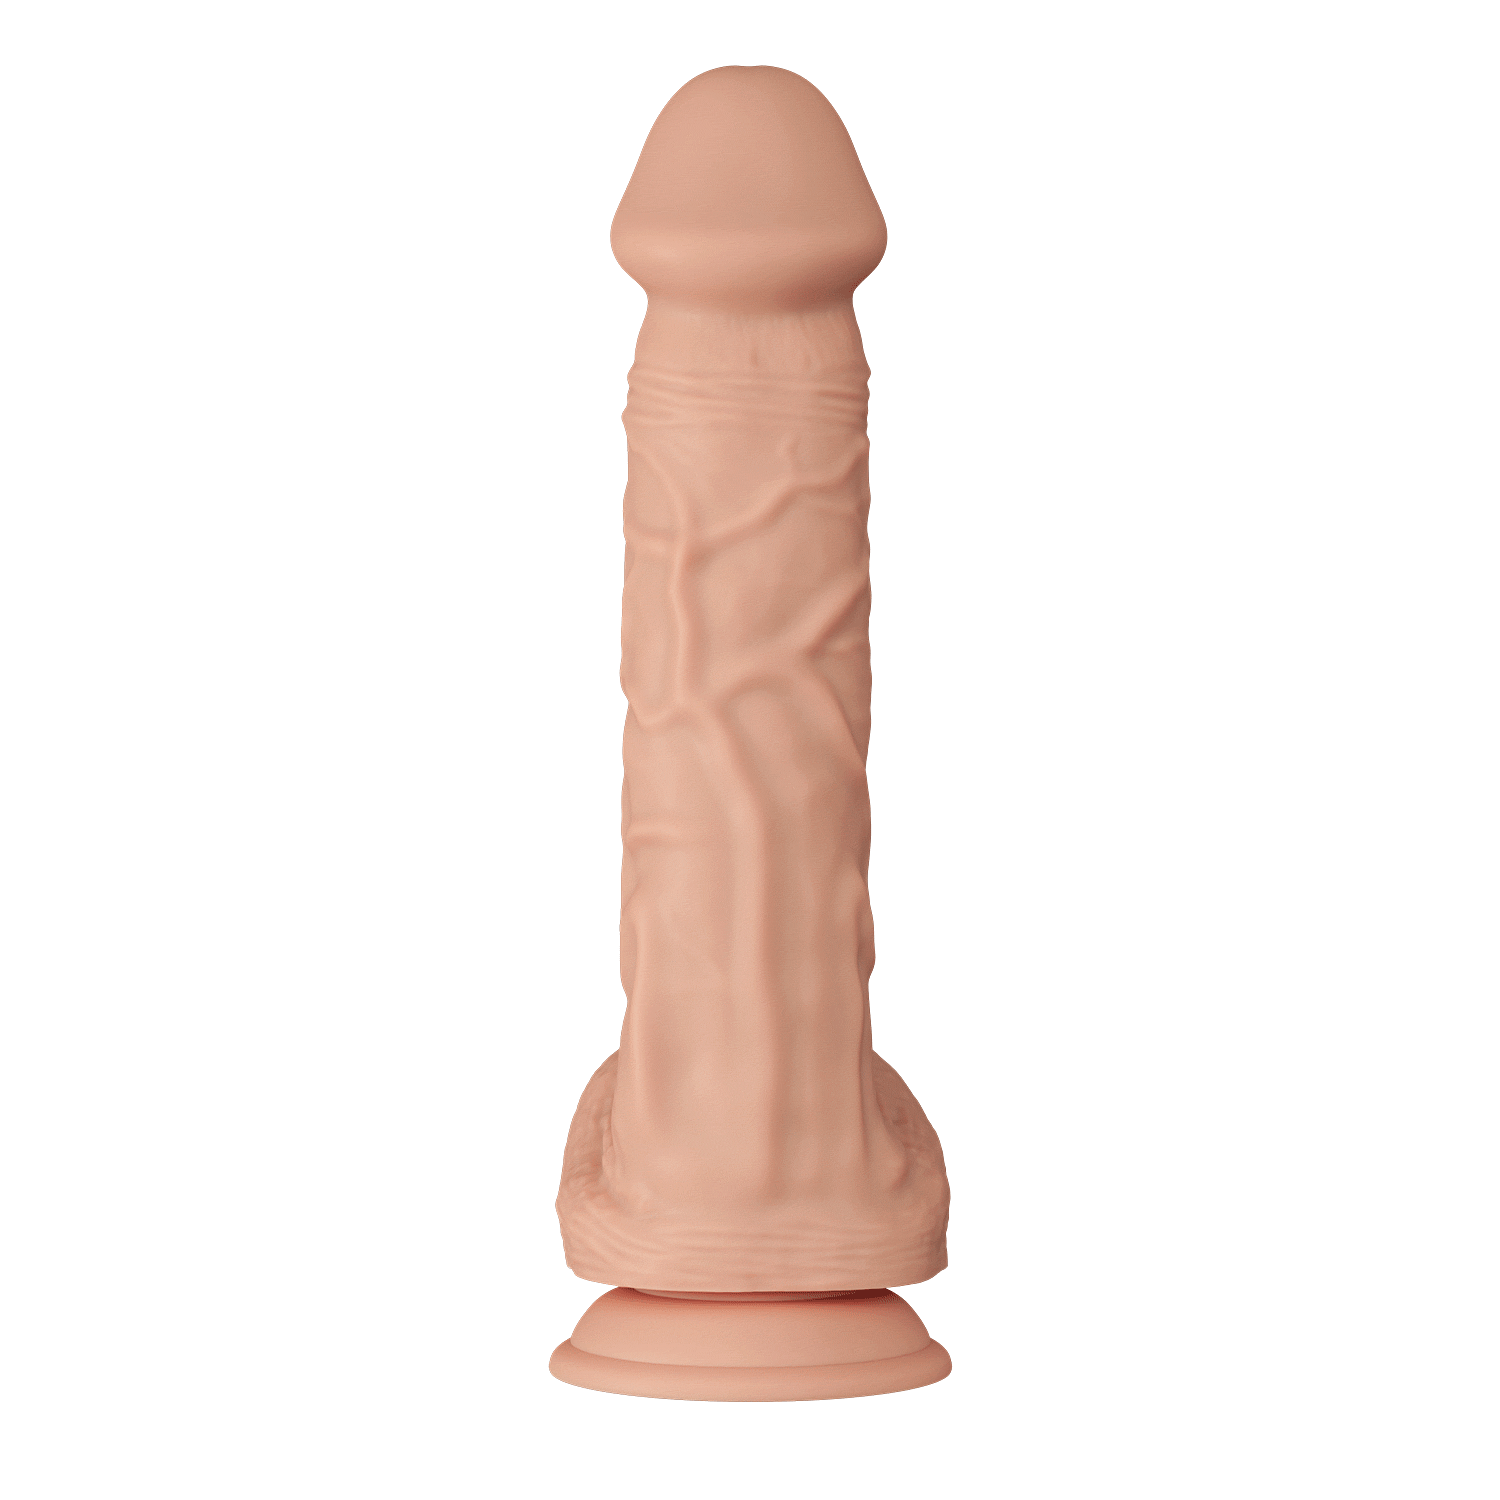 Baile 10.2 Inch Lifelike Dildo with Suction Cup in Flesh